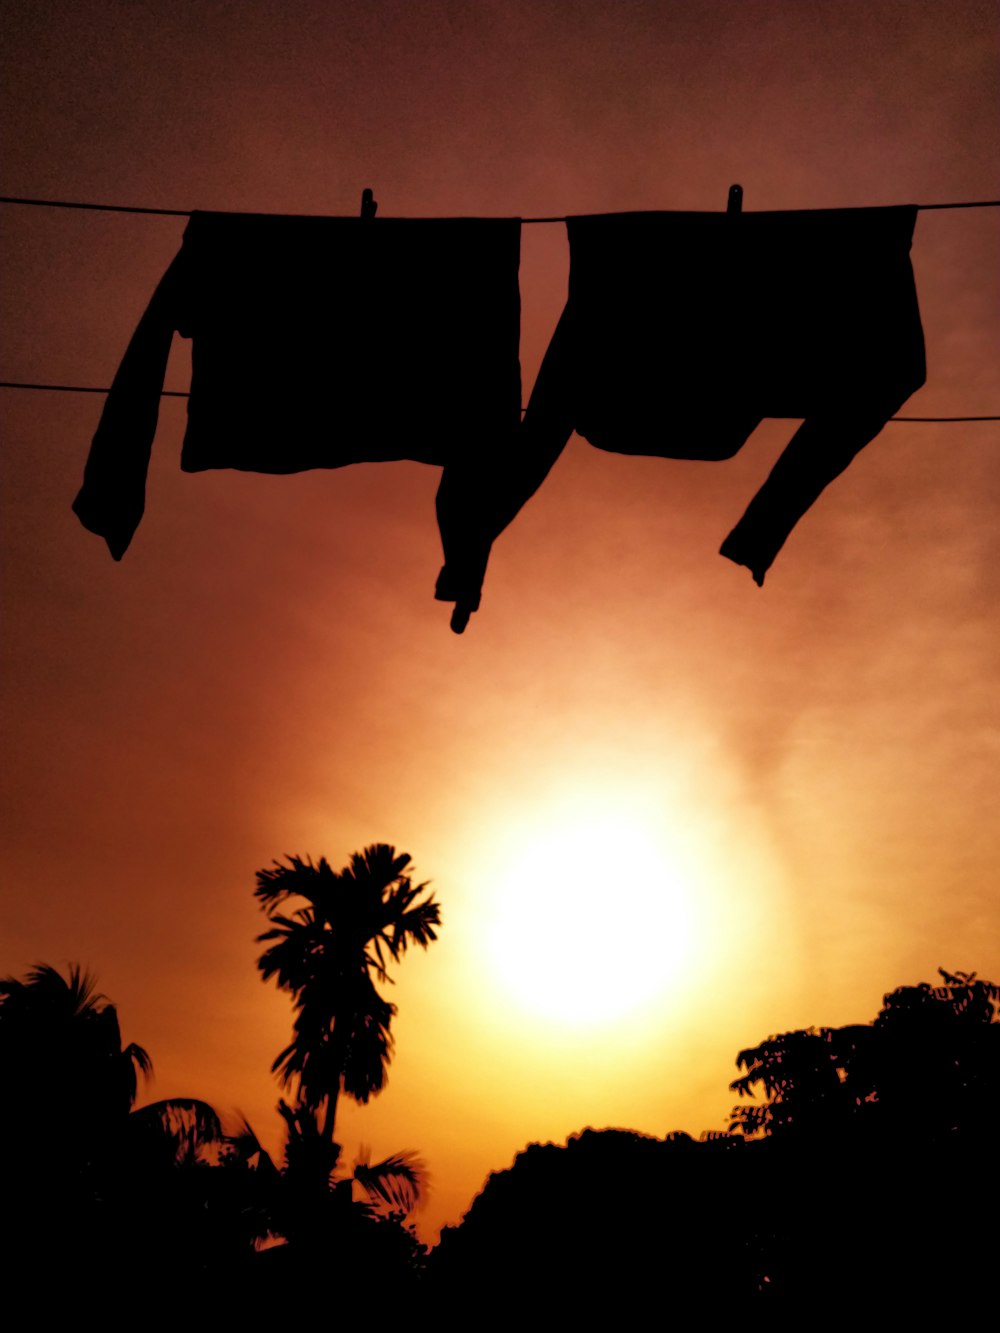 clothes hanging out to dry in front of the sun